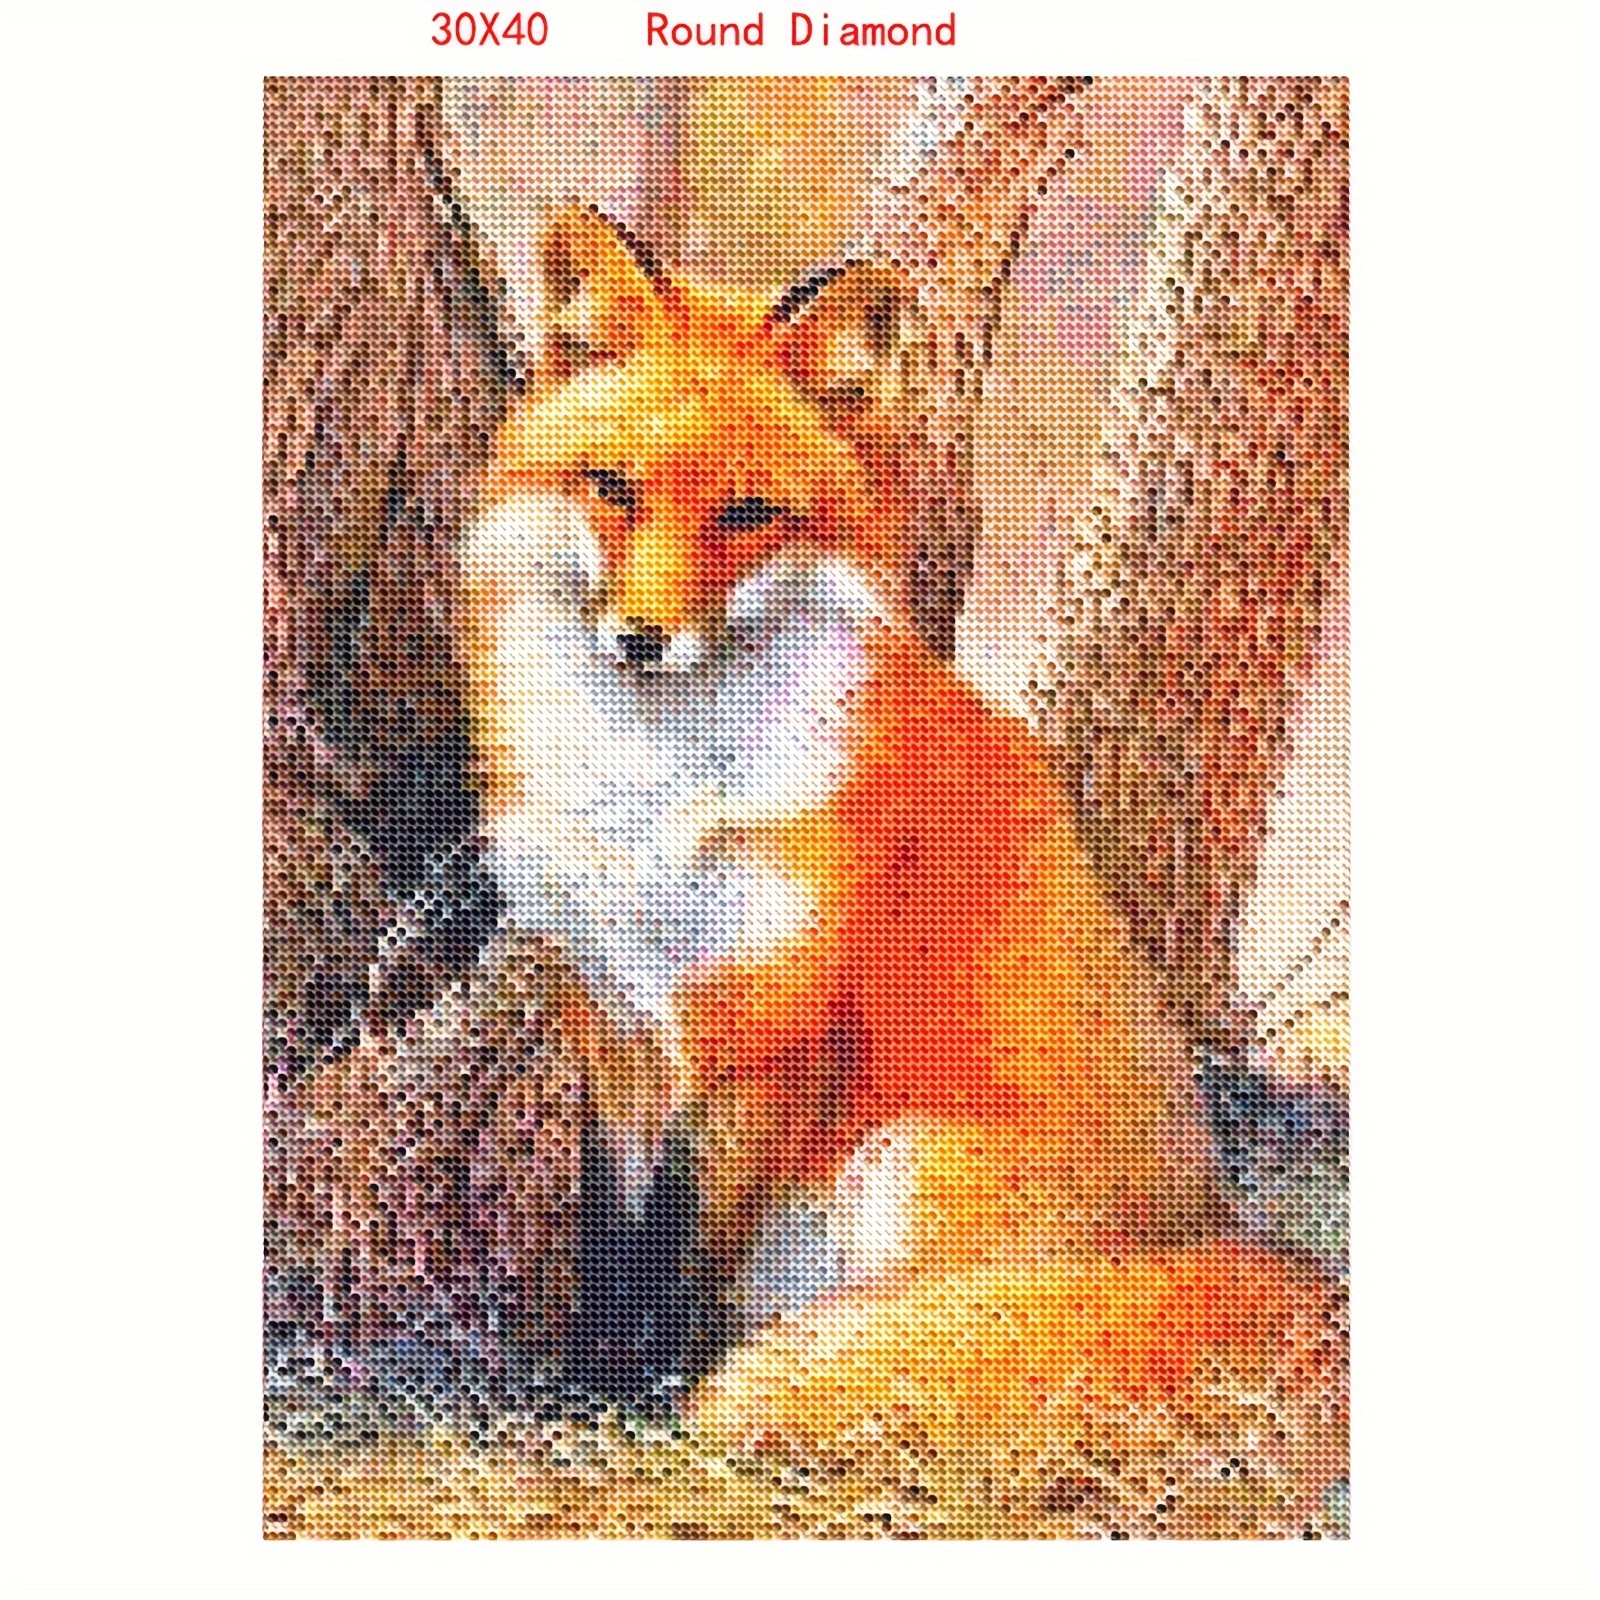 Diymood DIY 5D Diamond Painting Fox Kit for Adults - Diamond Art Colorful | Full Drill Round Crafts | Crystal Embroidery Mosaic Picture | Beginner 